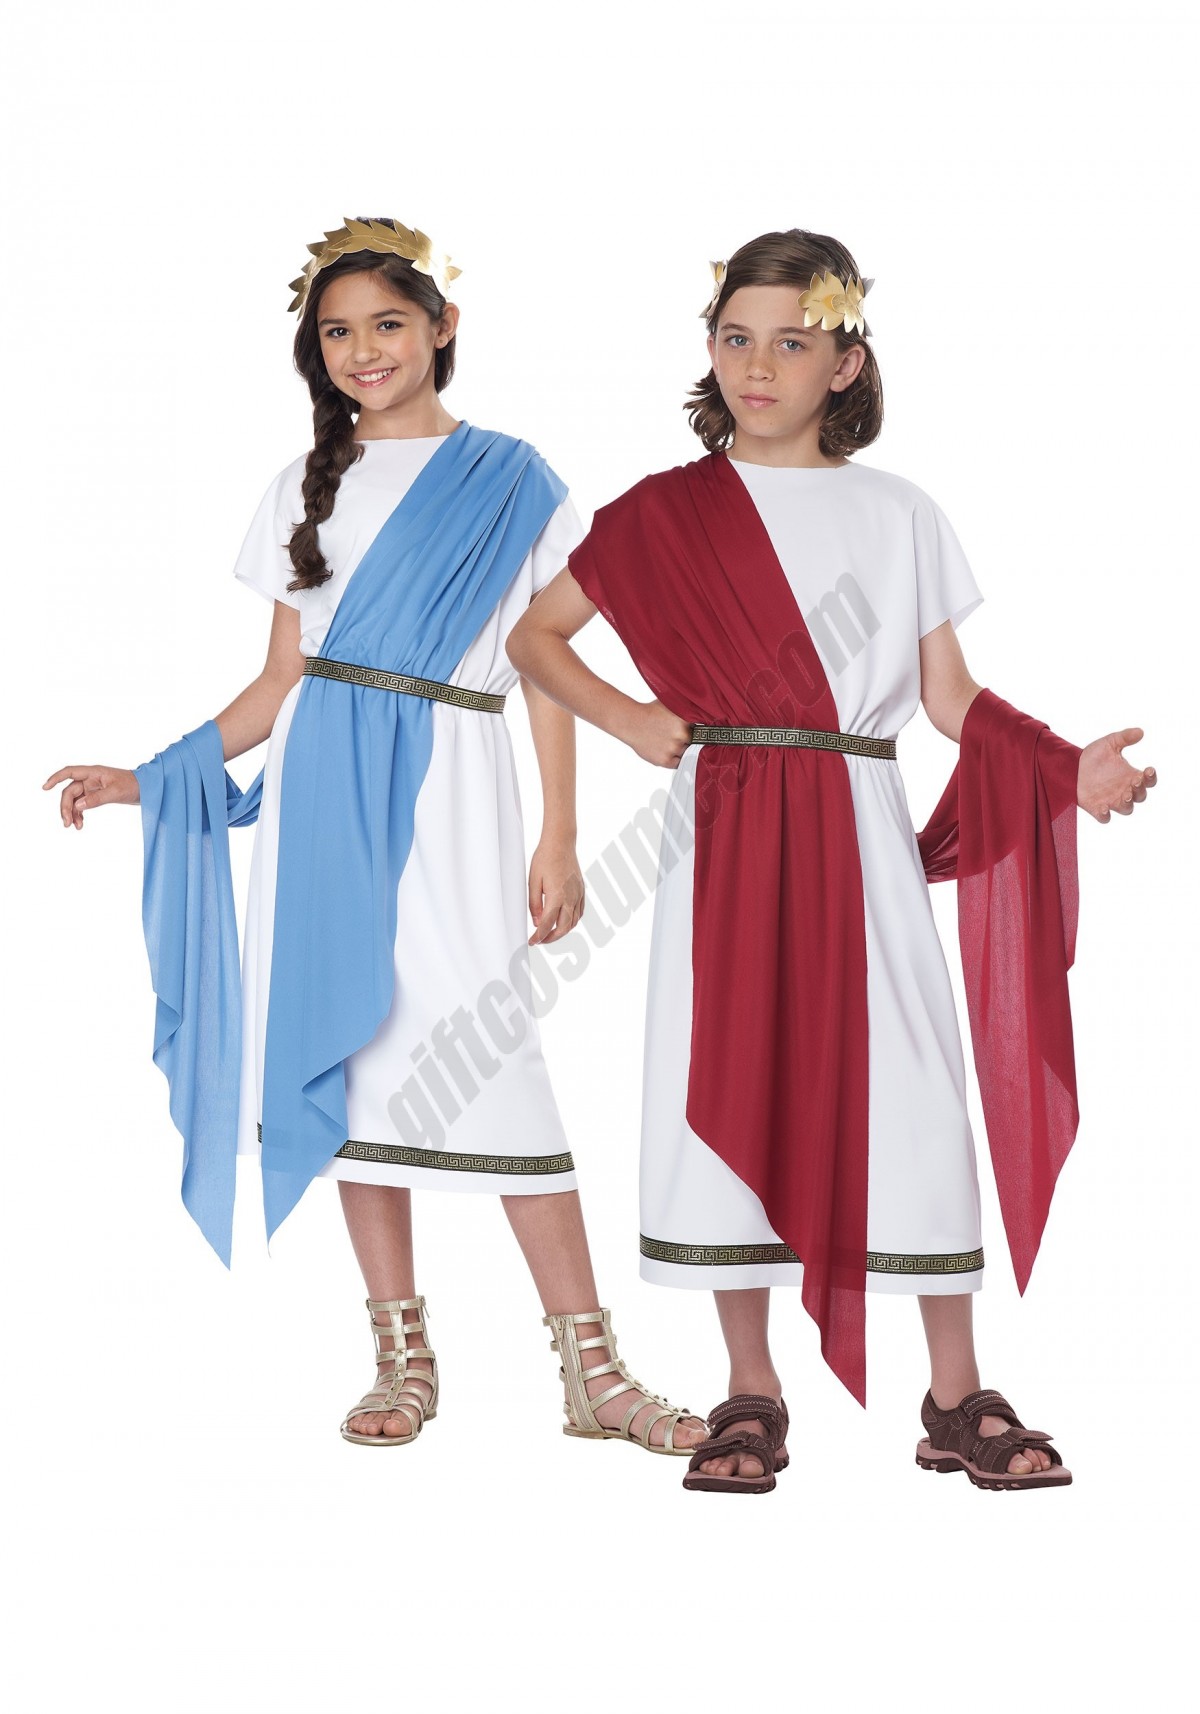 Kid's Grecian Toga Costume Promotions - -0